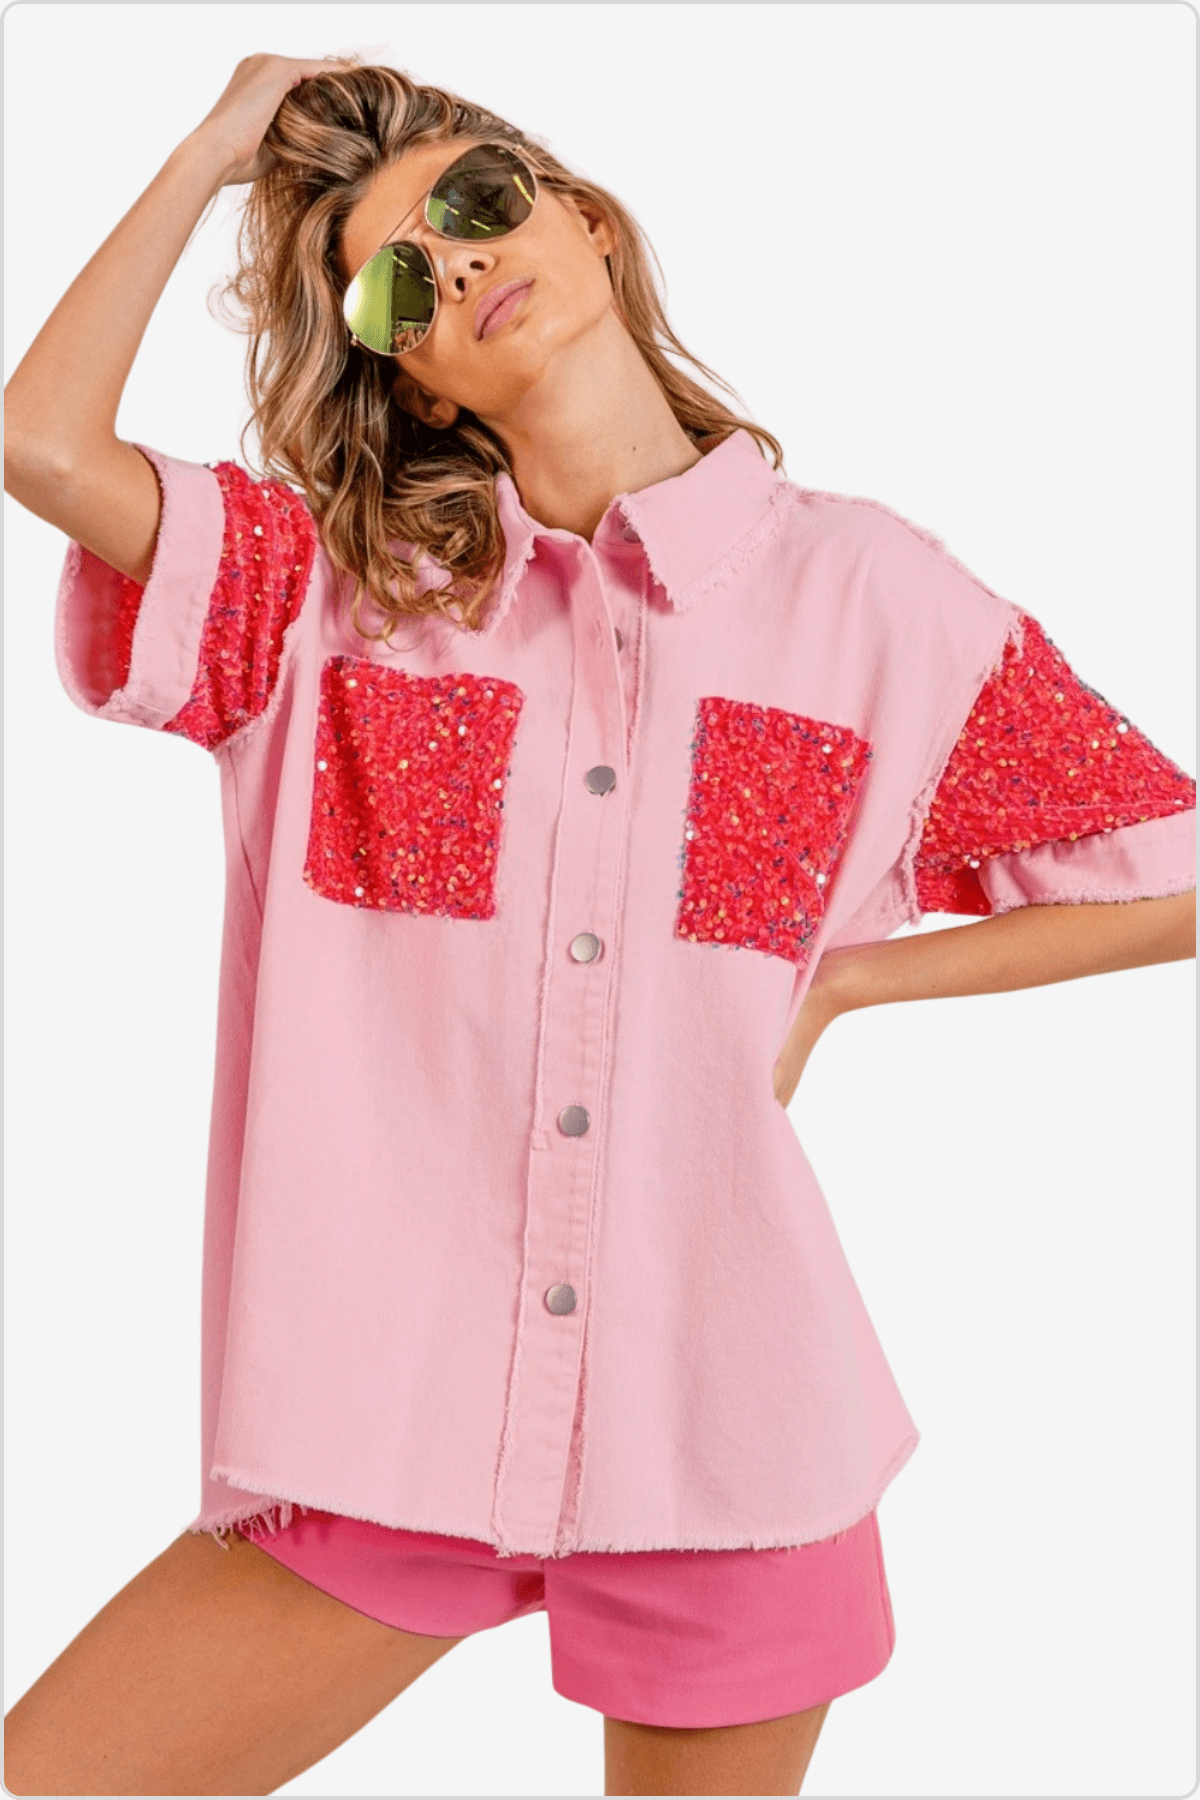 Trendy model in pink shirt with sequin pockets and matching shorts, wearing sunglasses.